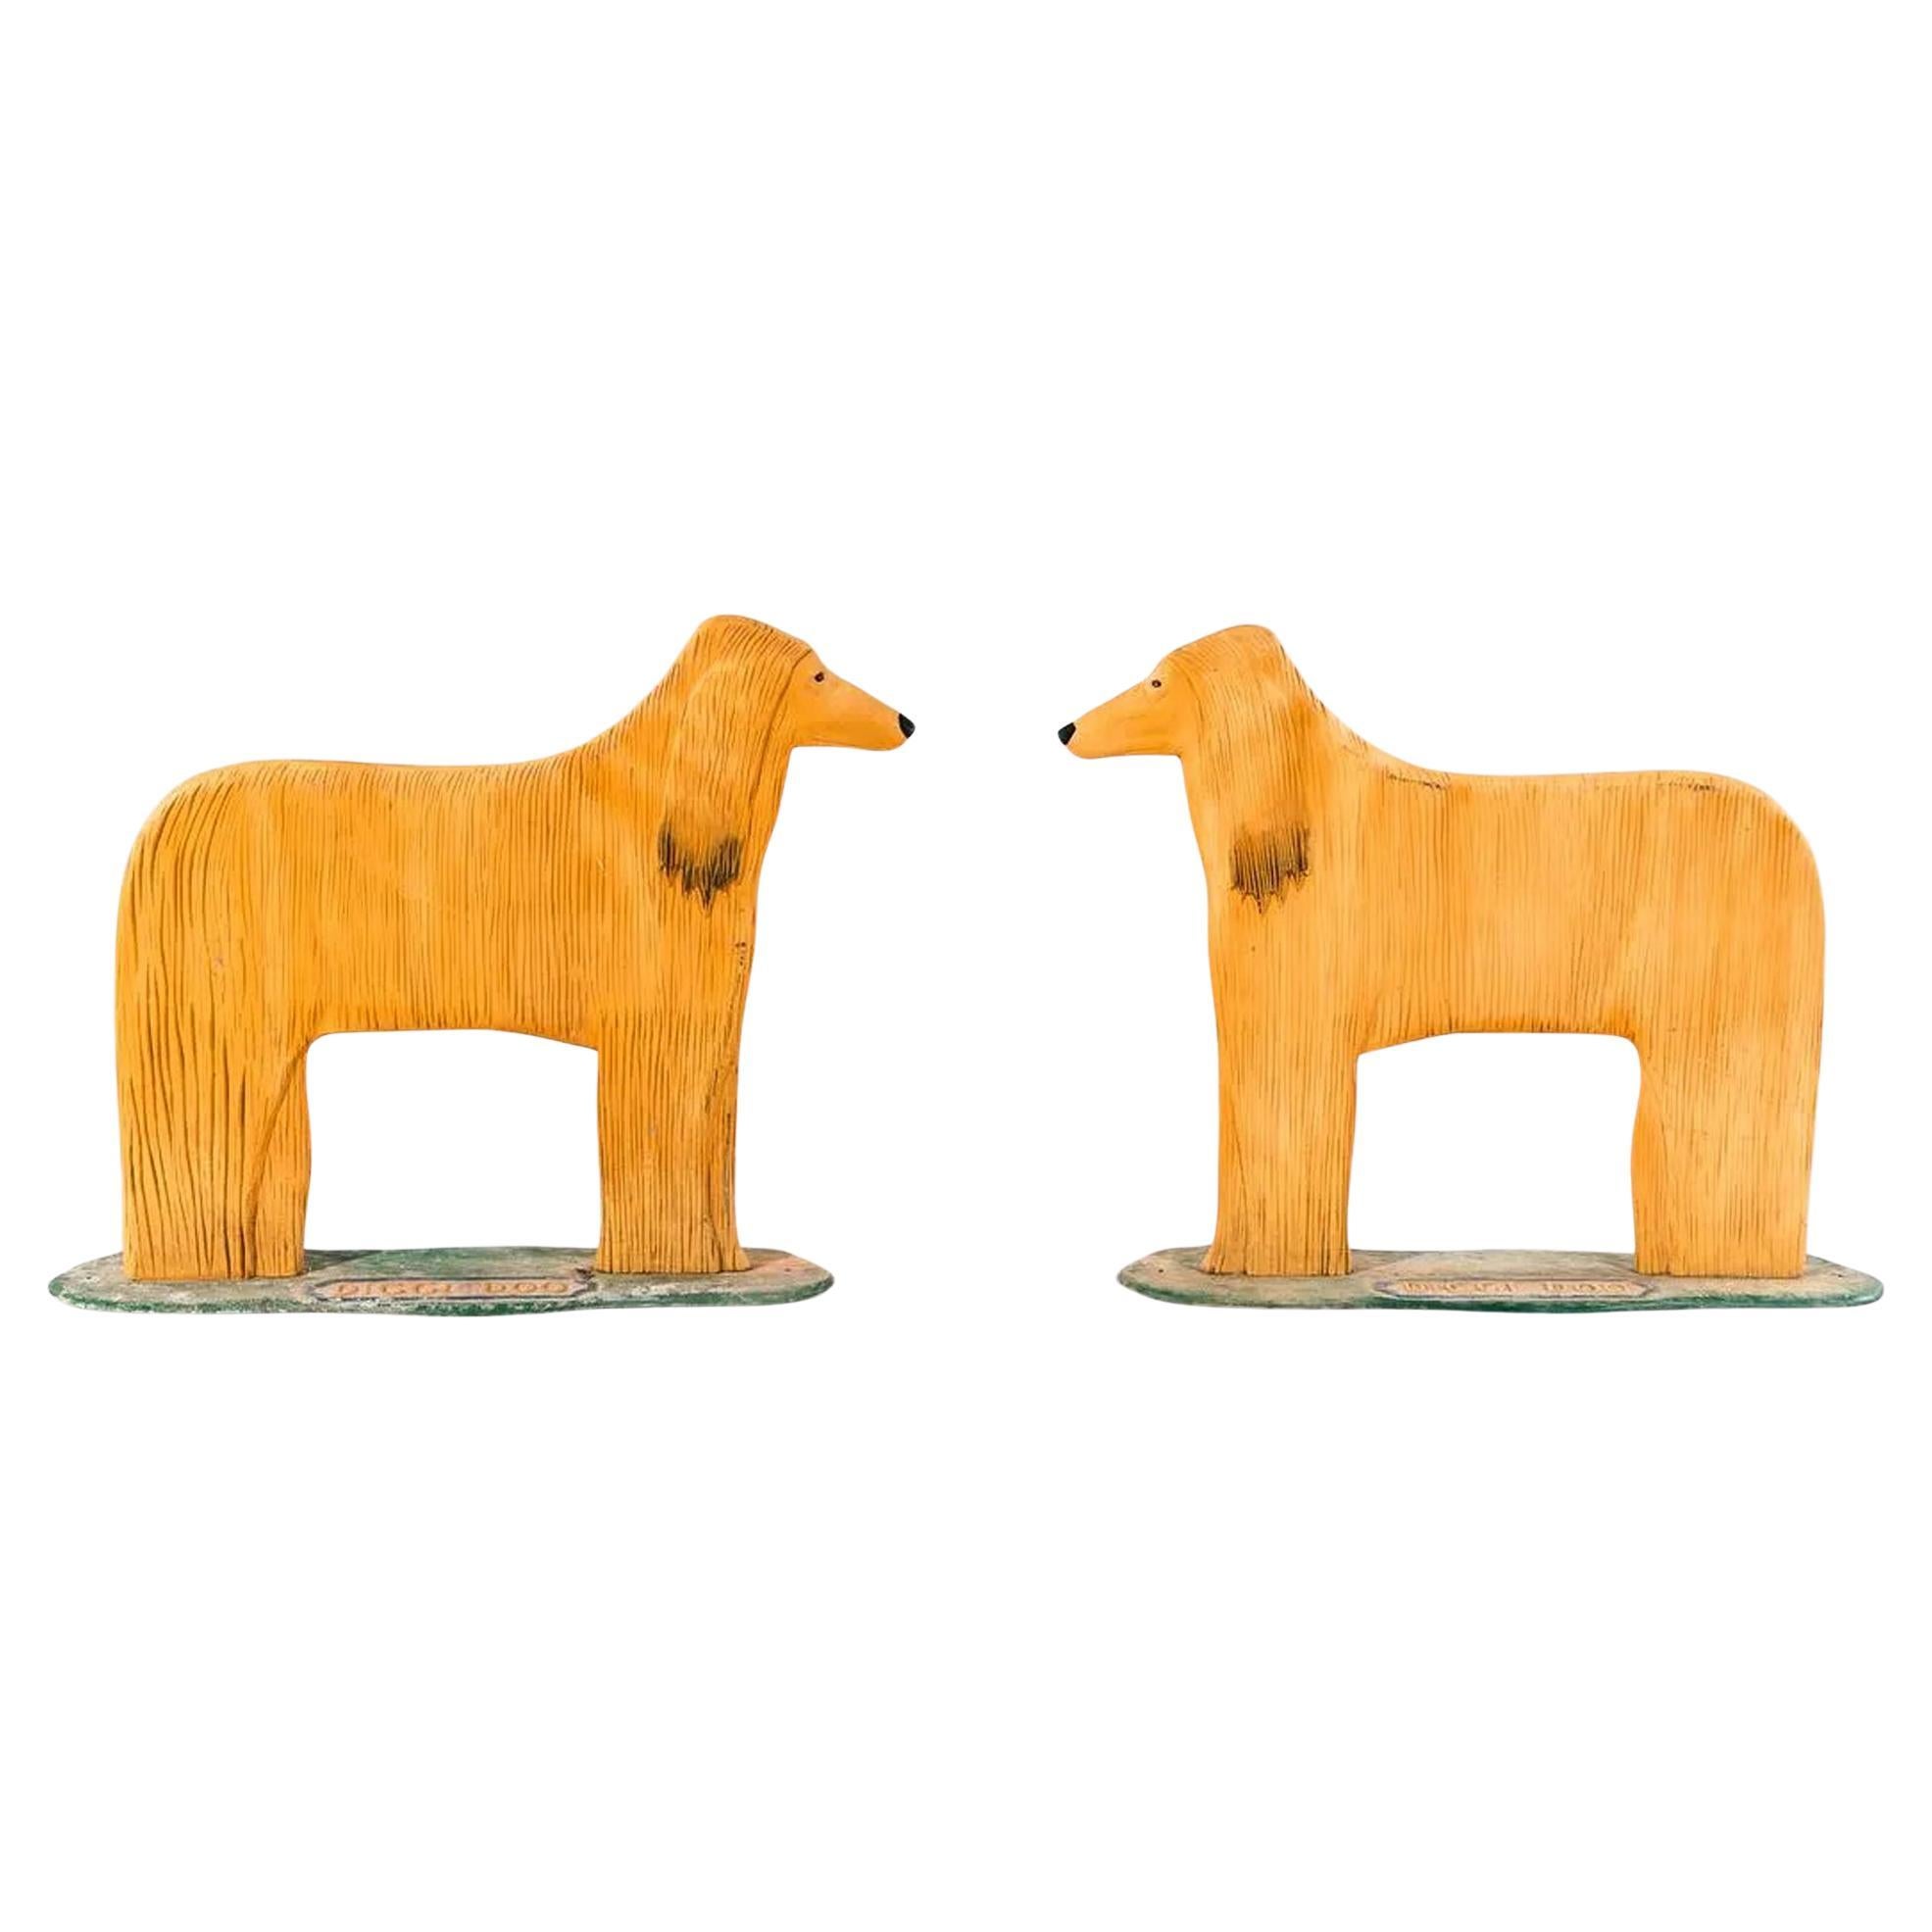 Afghan Dog Sculptures, by Stephen Huneck, Vermont, 1991, Signed and Dated